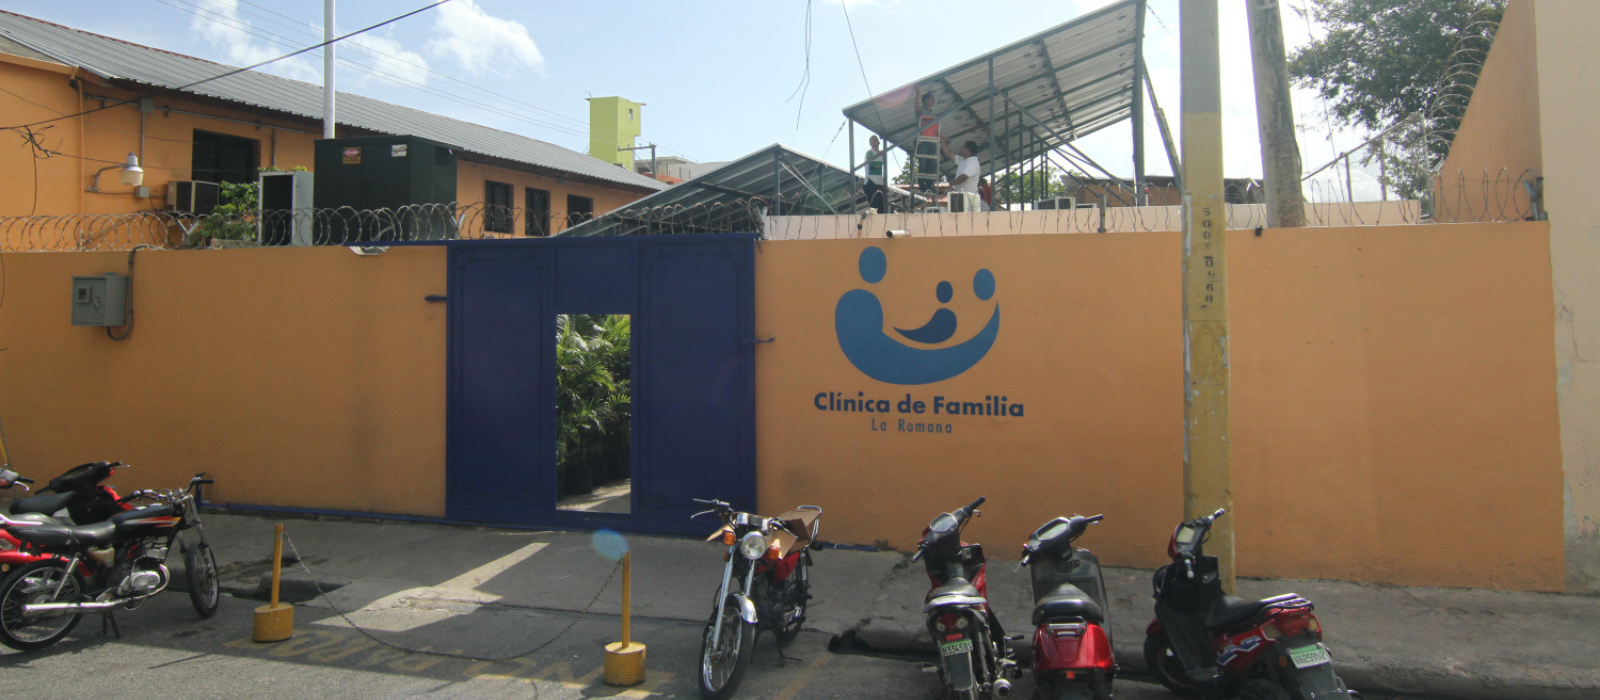 image of the outside of a clinic